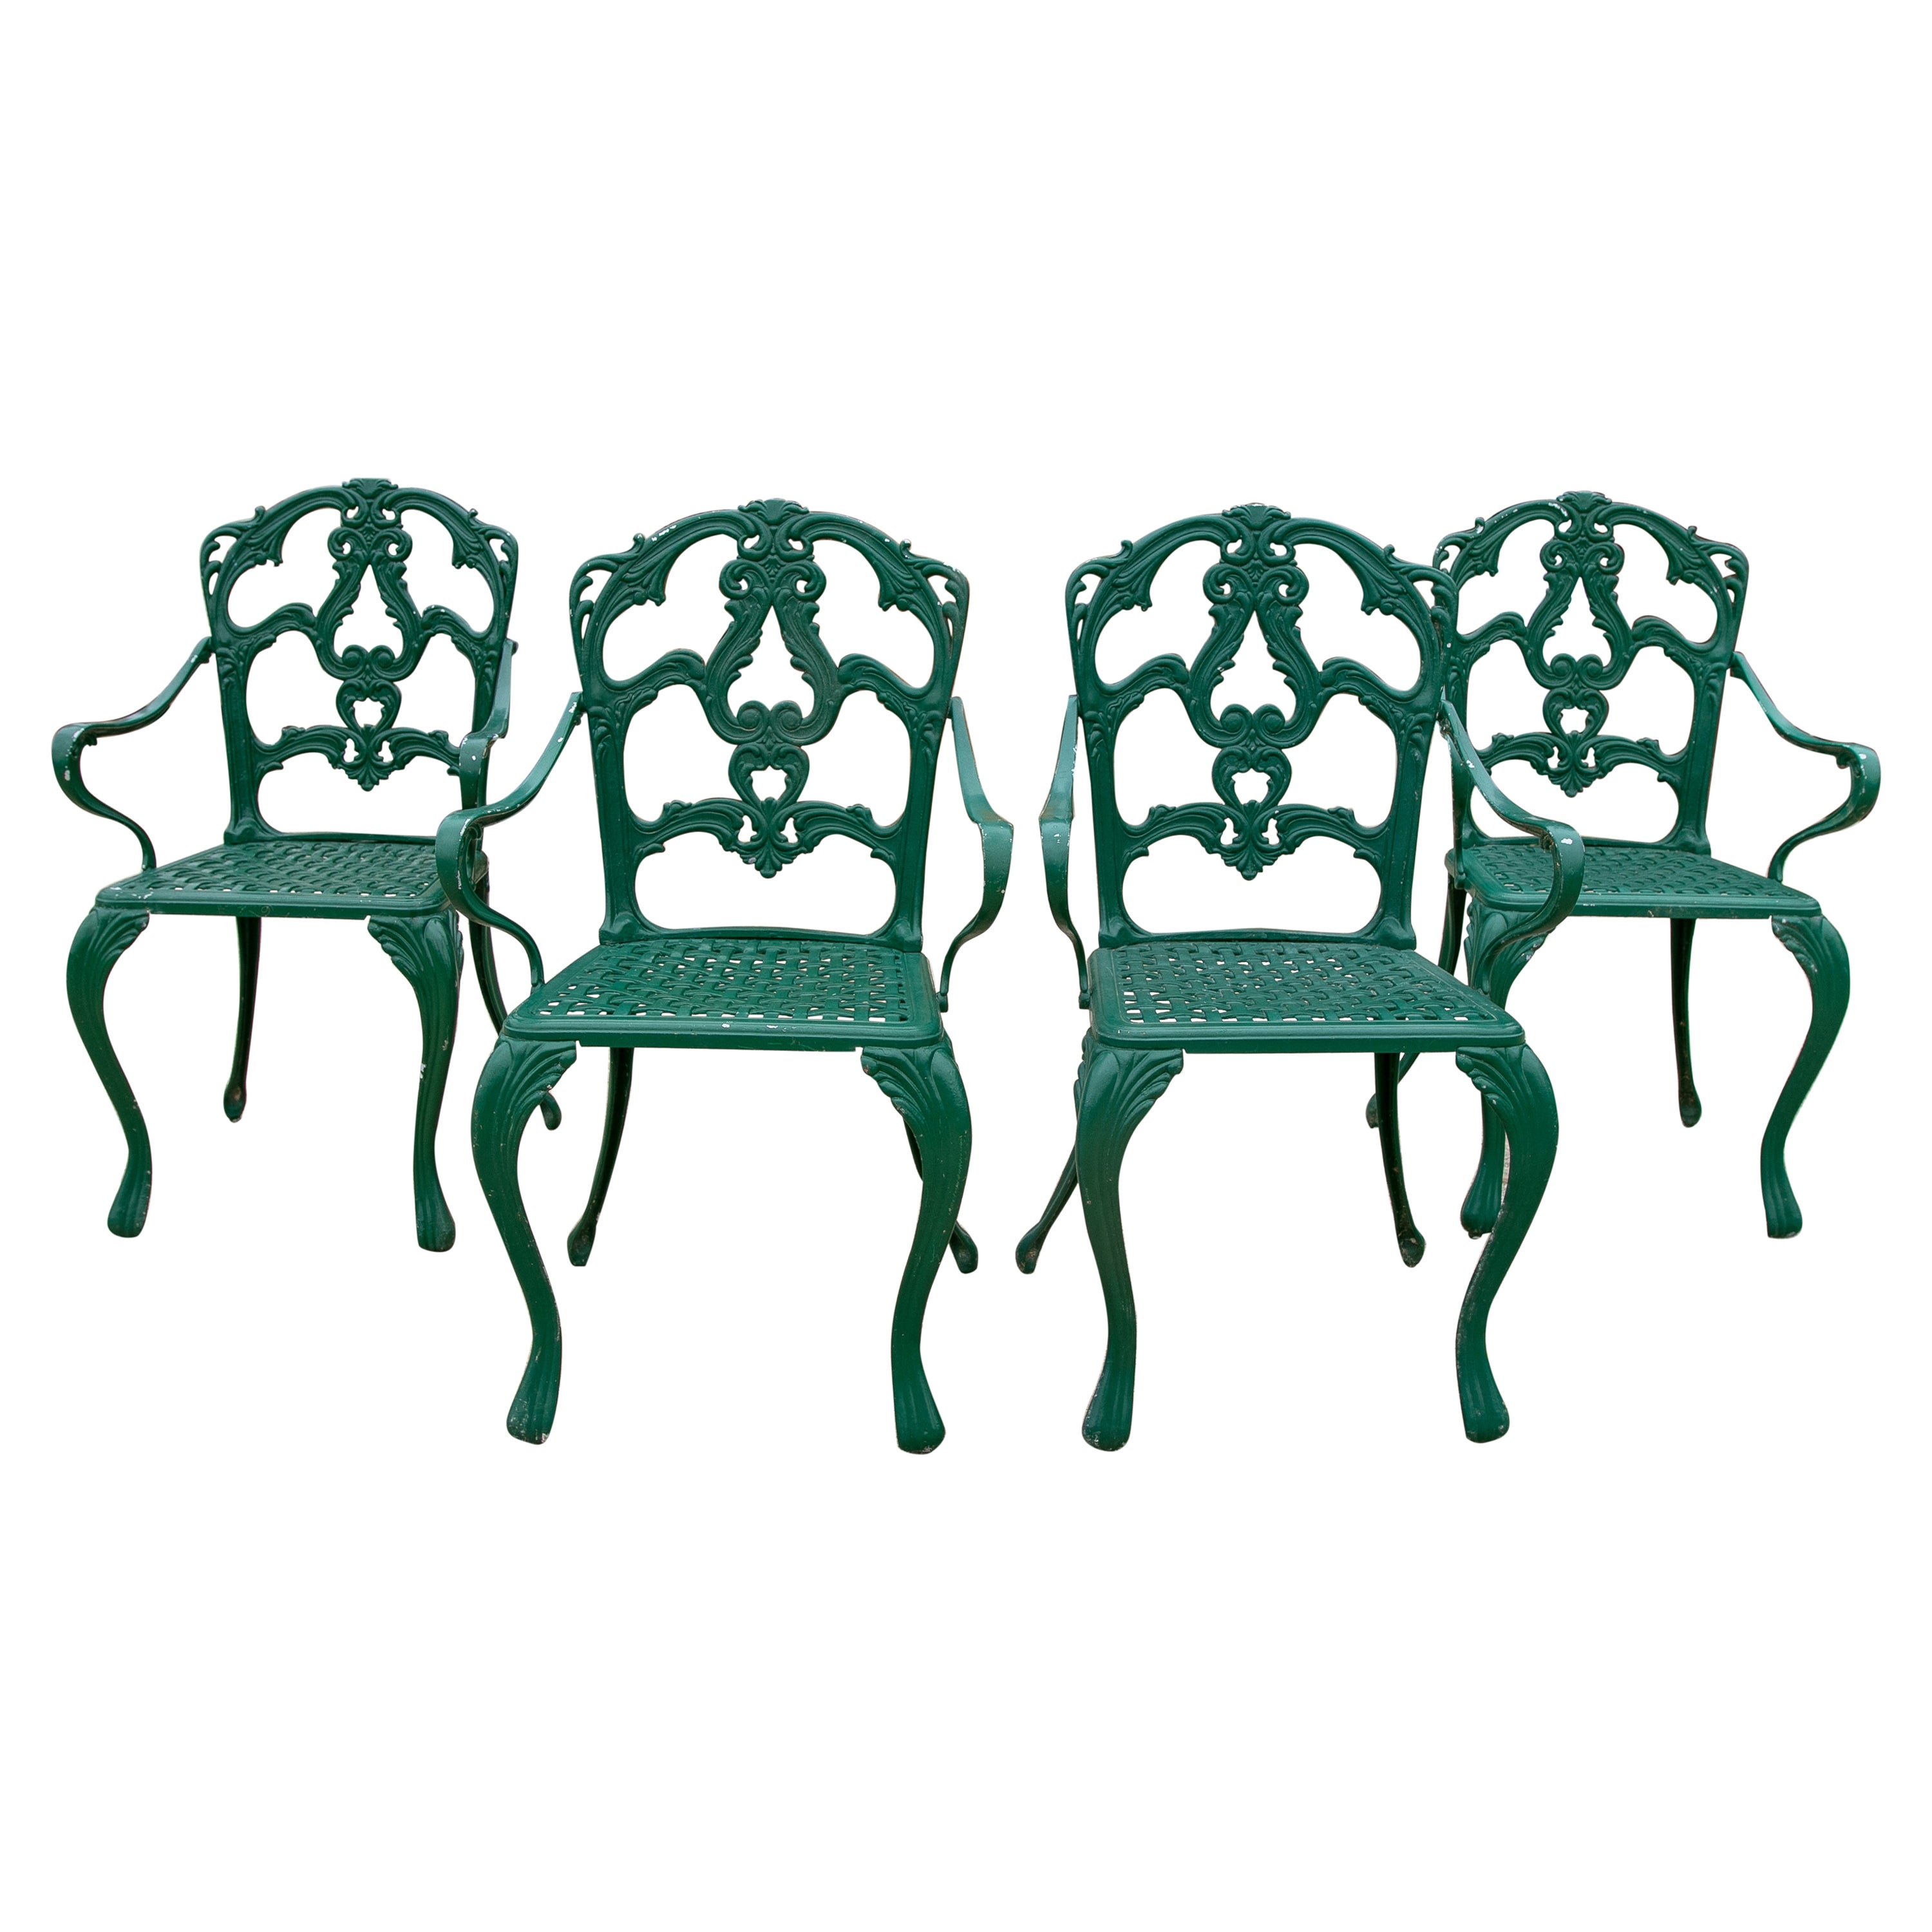 1980s Set of Four Green-Painted Iron Chairs 